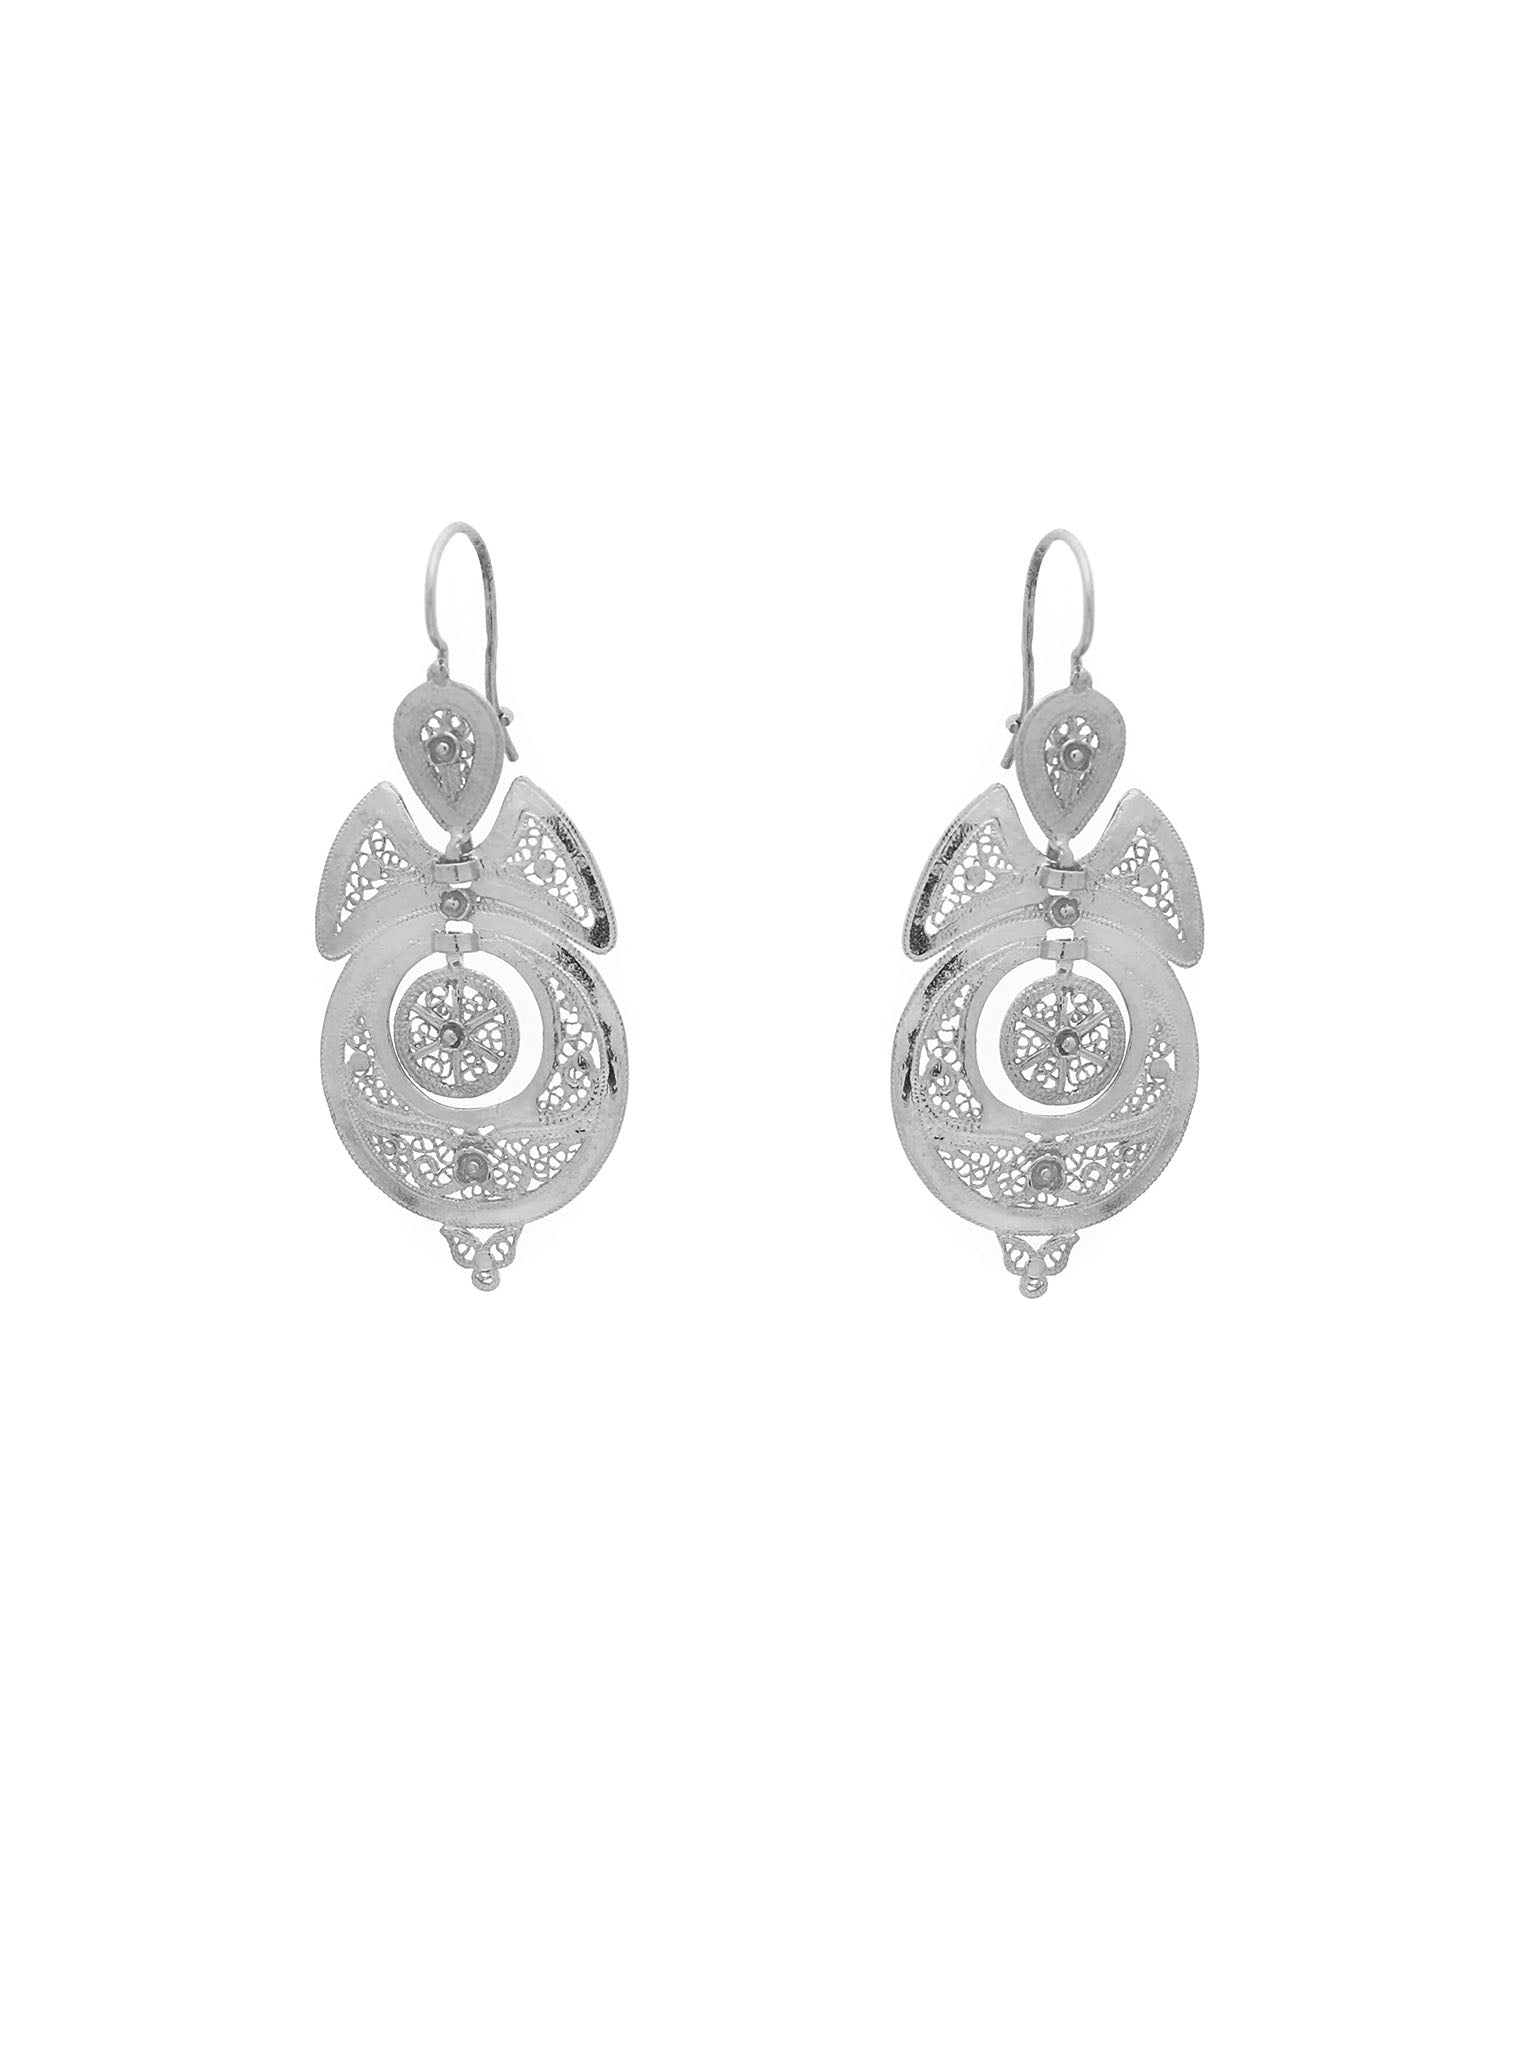 Earrings rounded queen (size S)